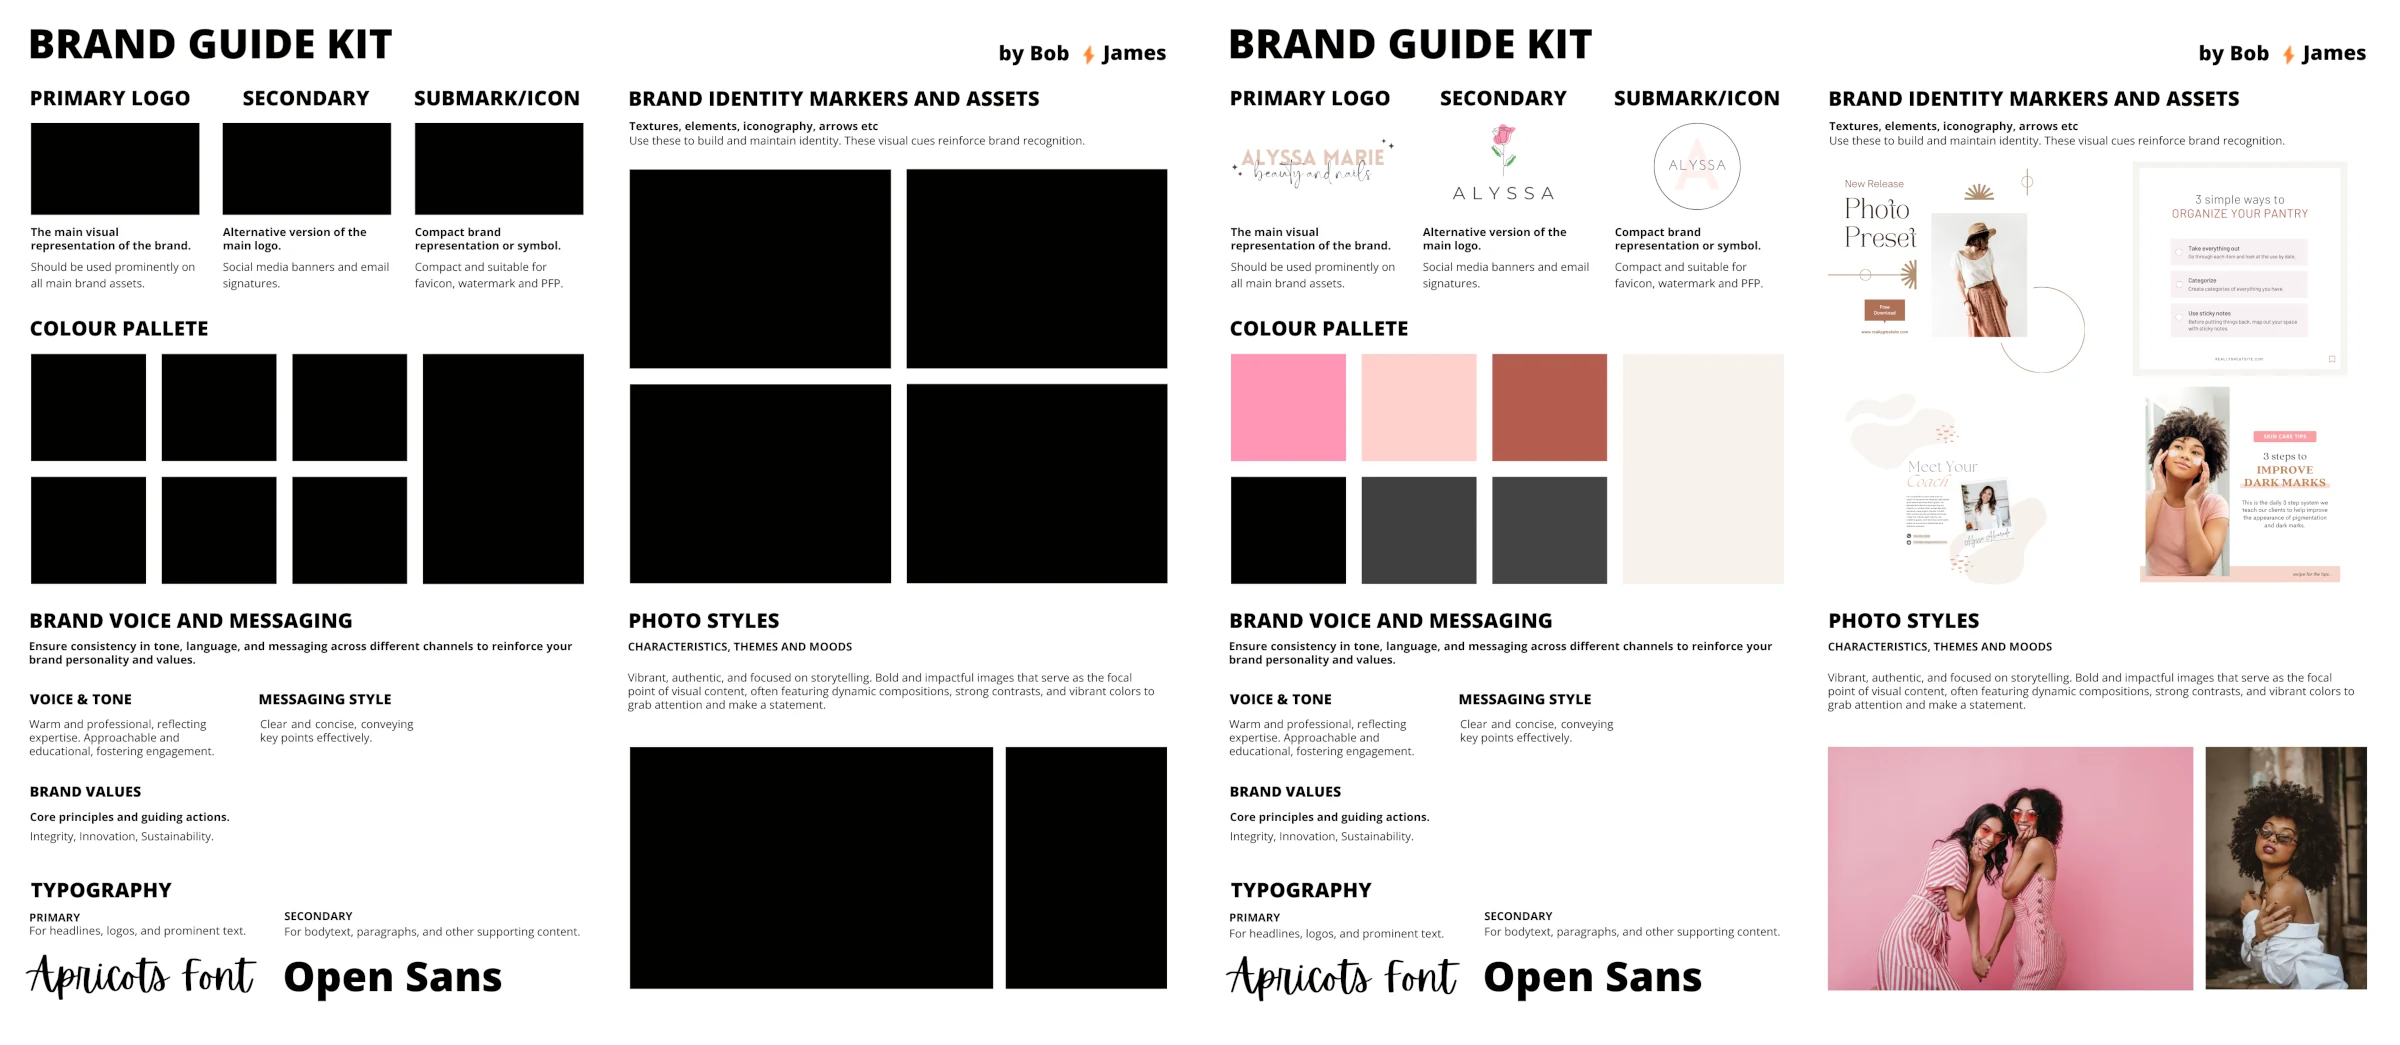 Brand Style Guide Kits